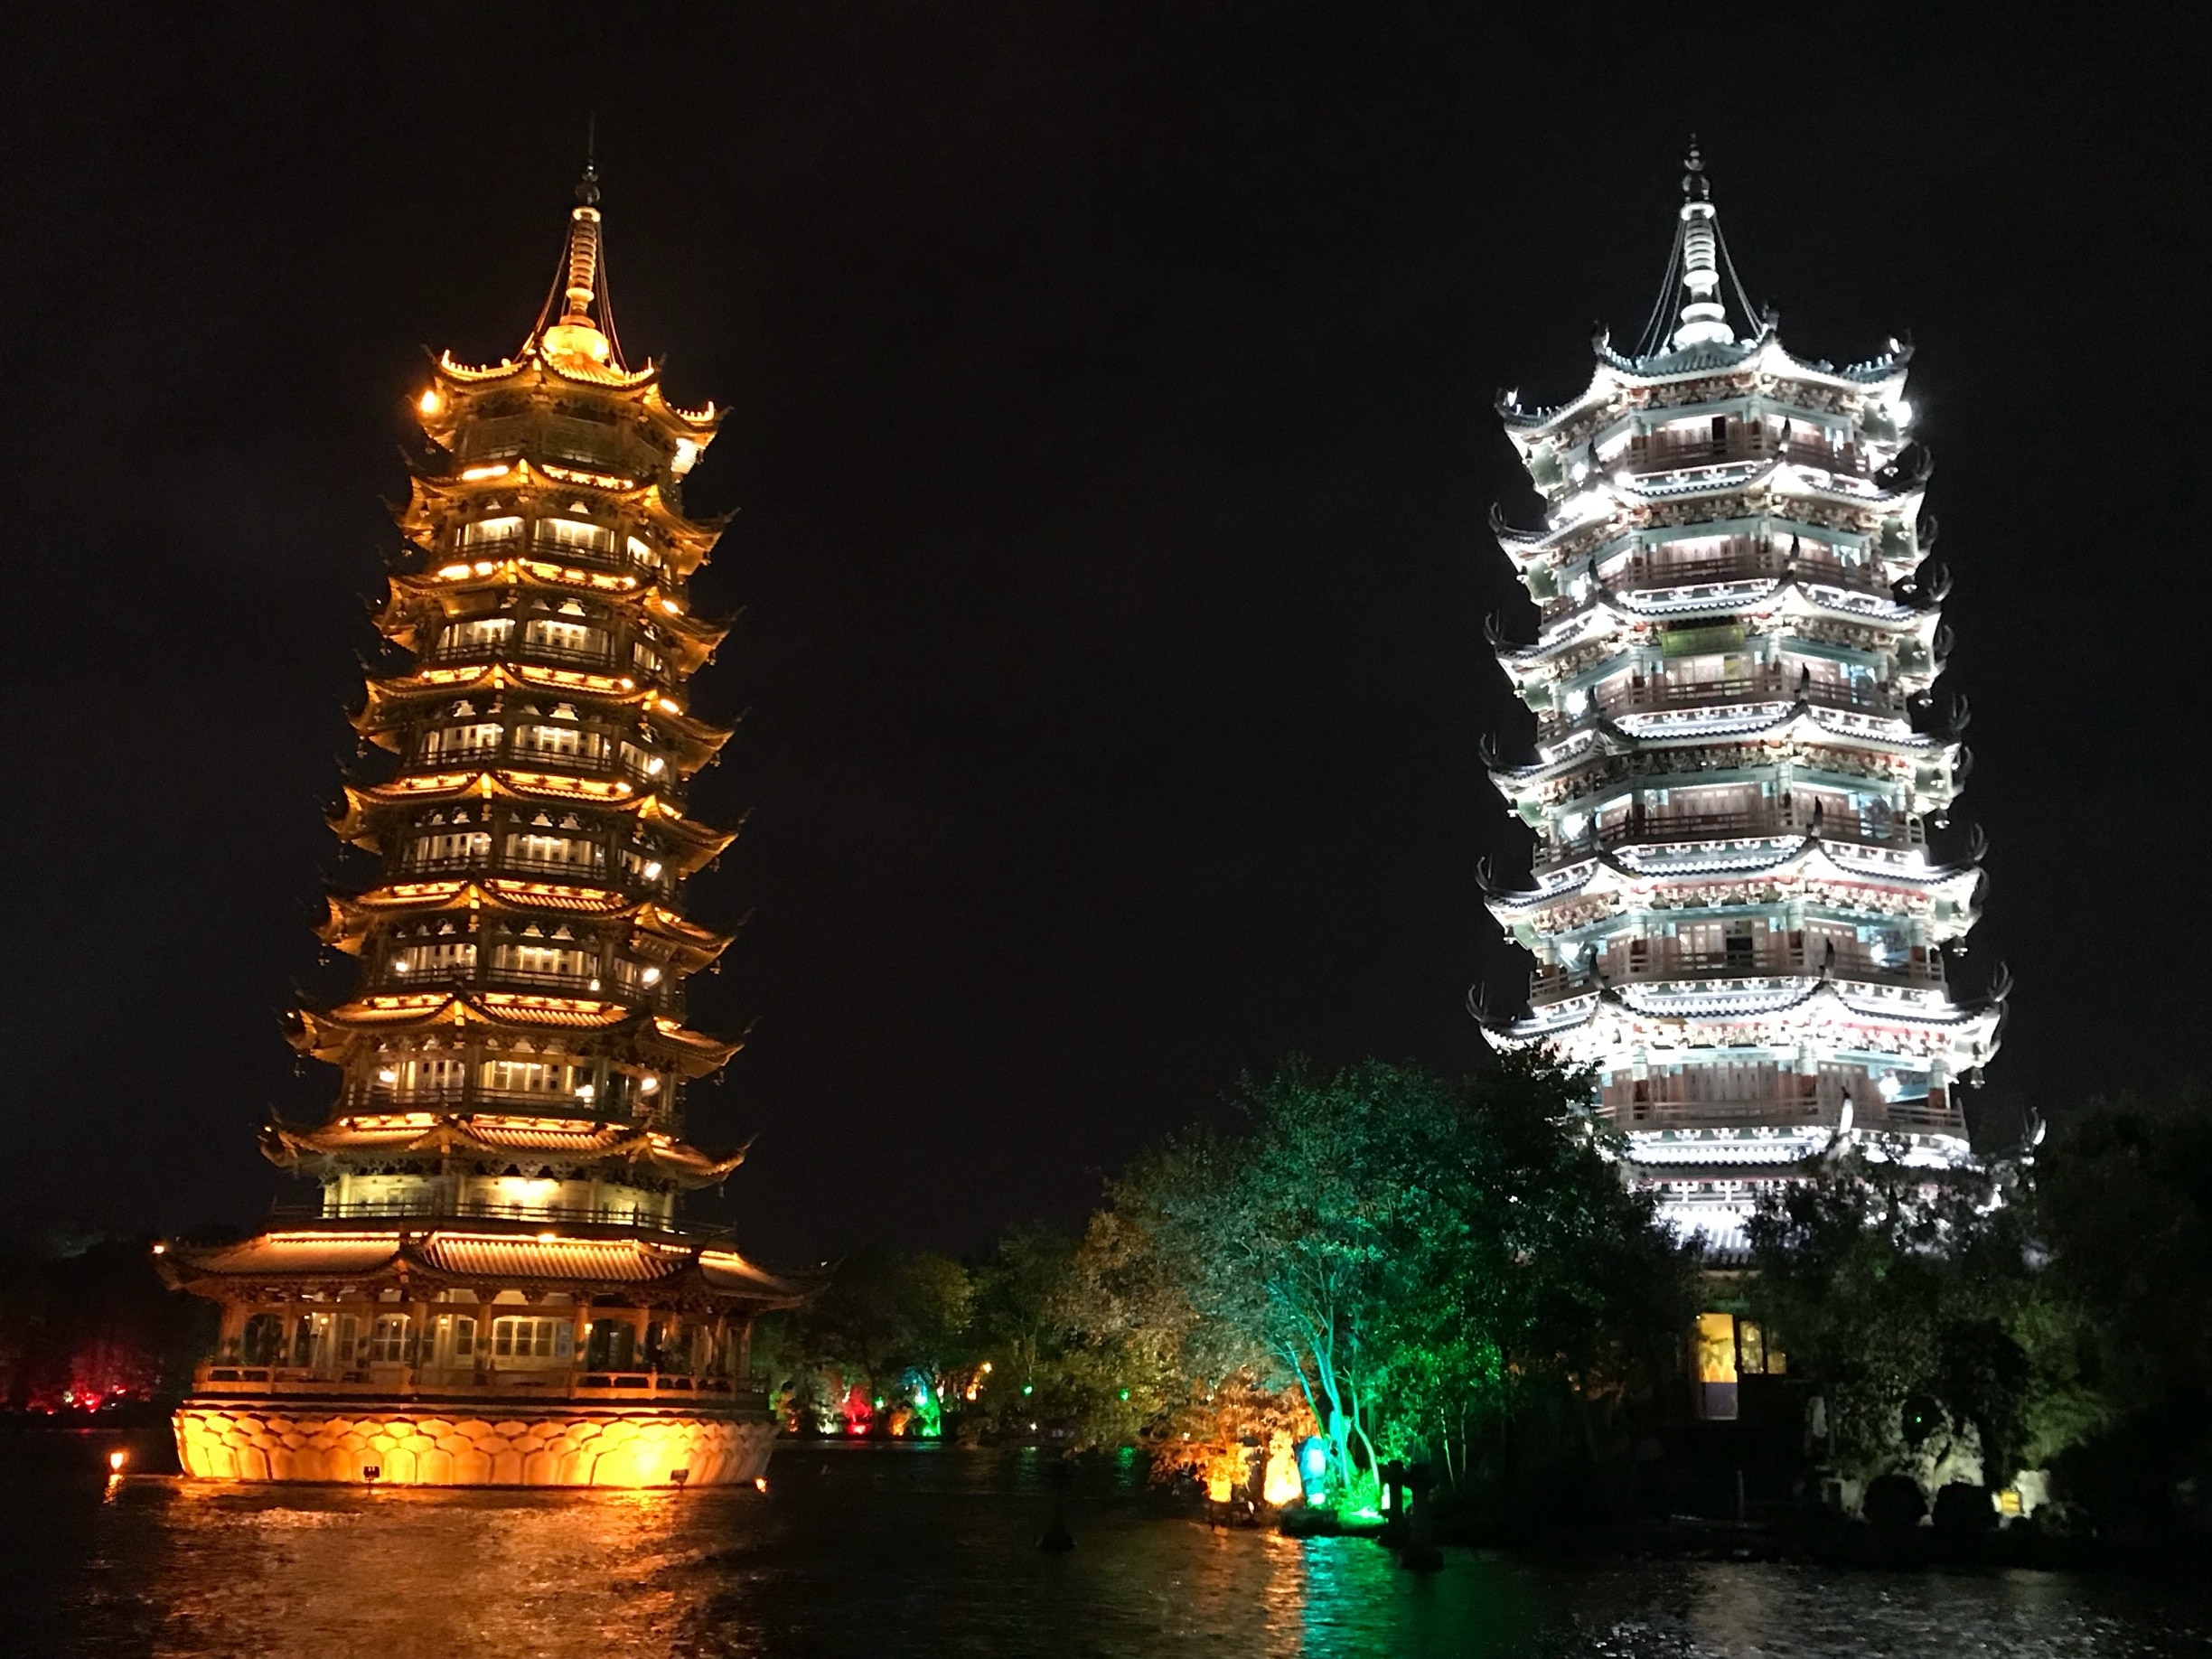 Located in Guilin, Two Rivers and Four Lakes Scenic Spot refer to the landscape - Sun and Moon Pagodas - Mulong Pagoda was built by imitating Longhua Pagoda in Song Dynasty in Shanghai.